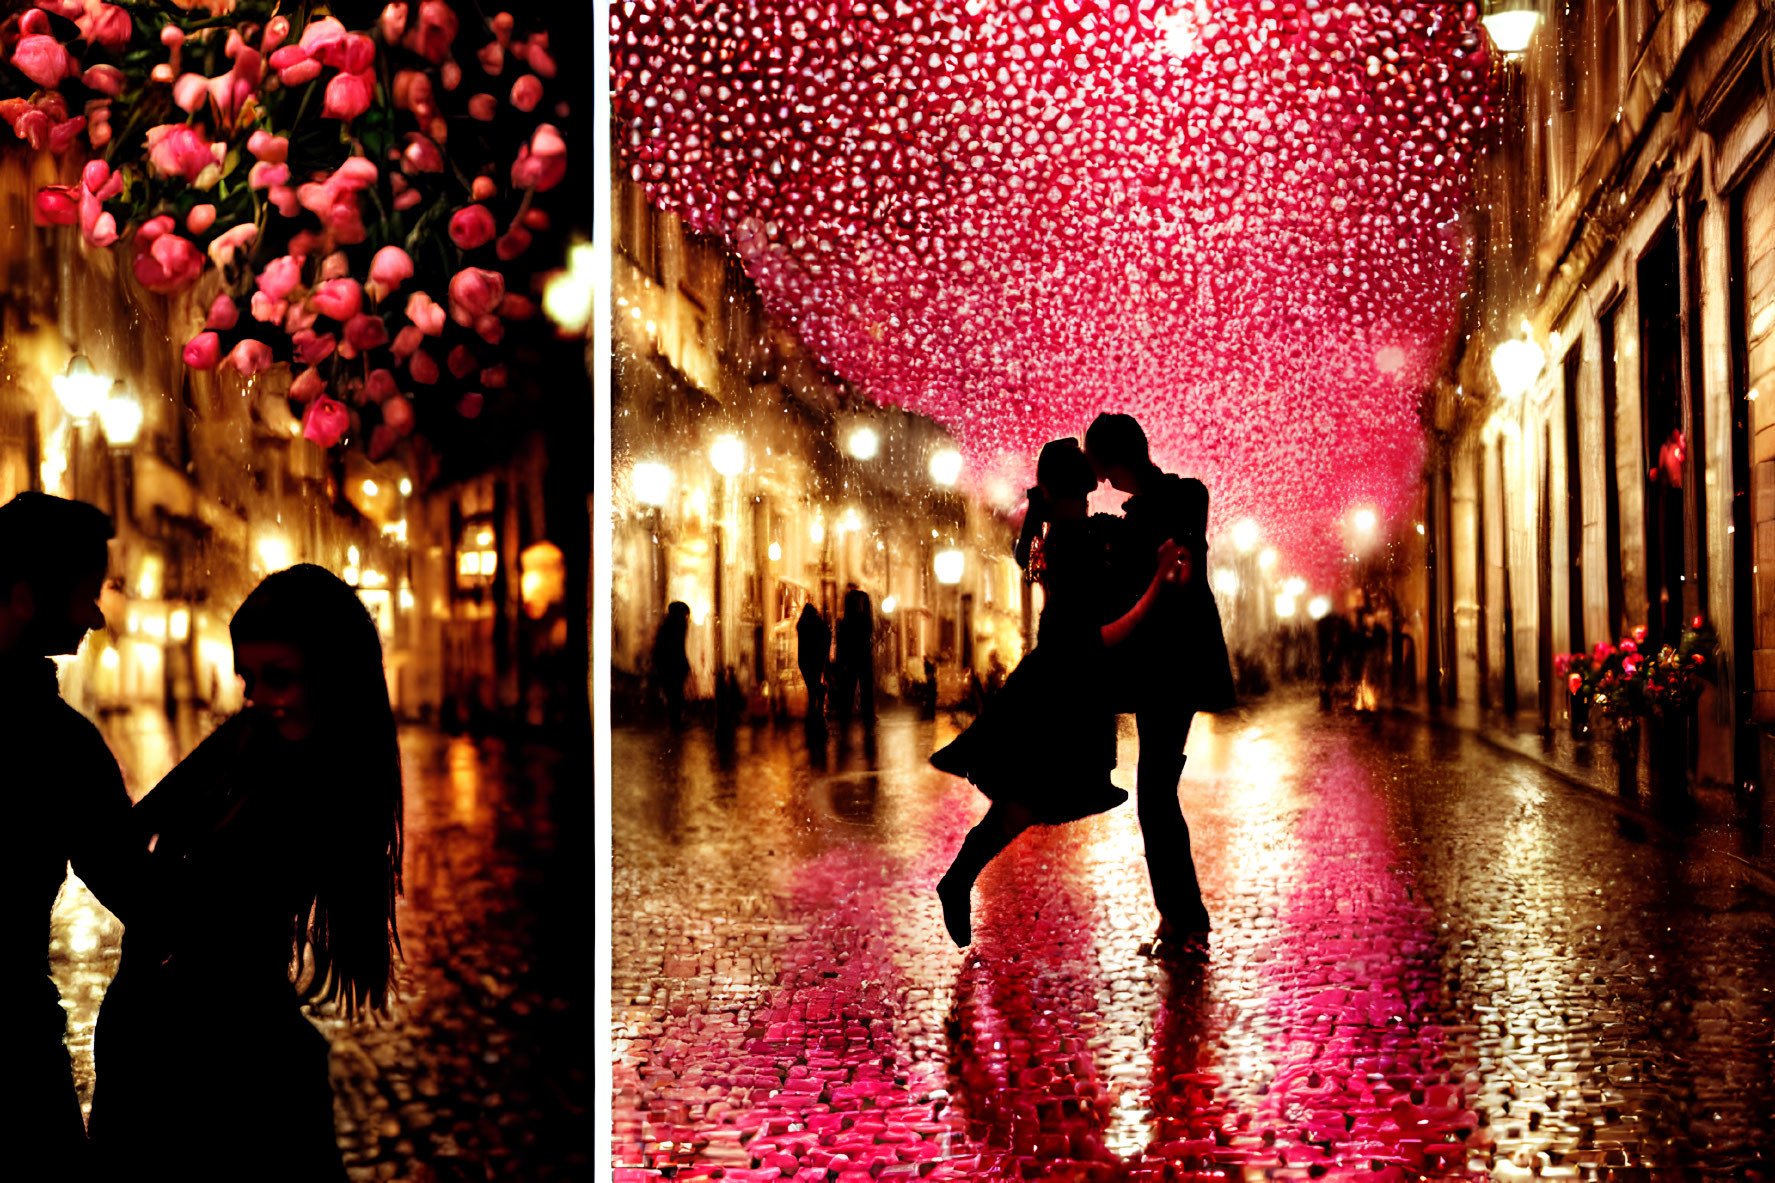 Romantic couple under pink flower canopy on rain-kissed street at night